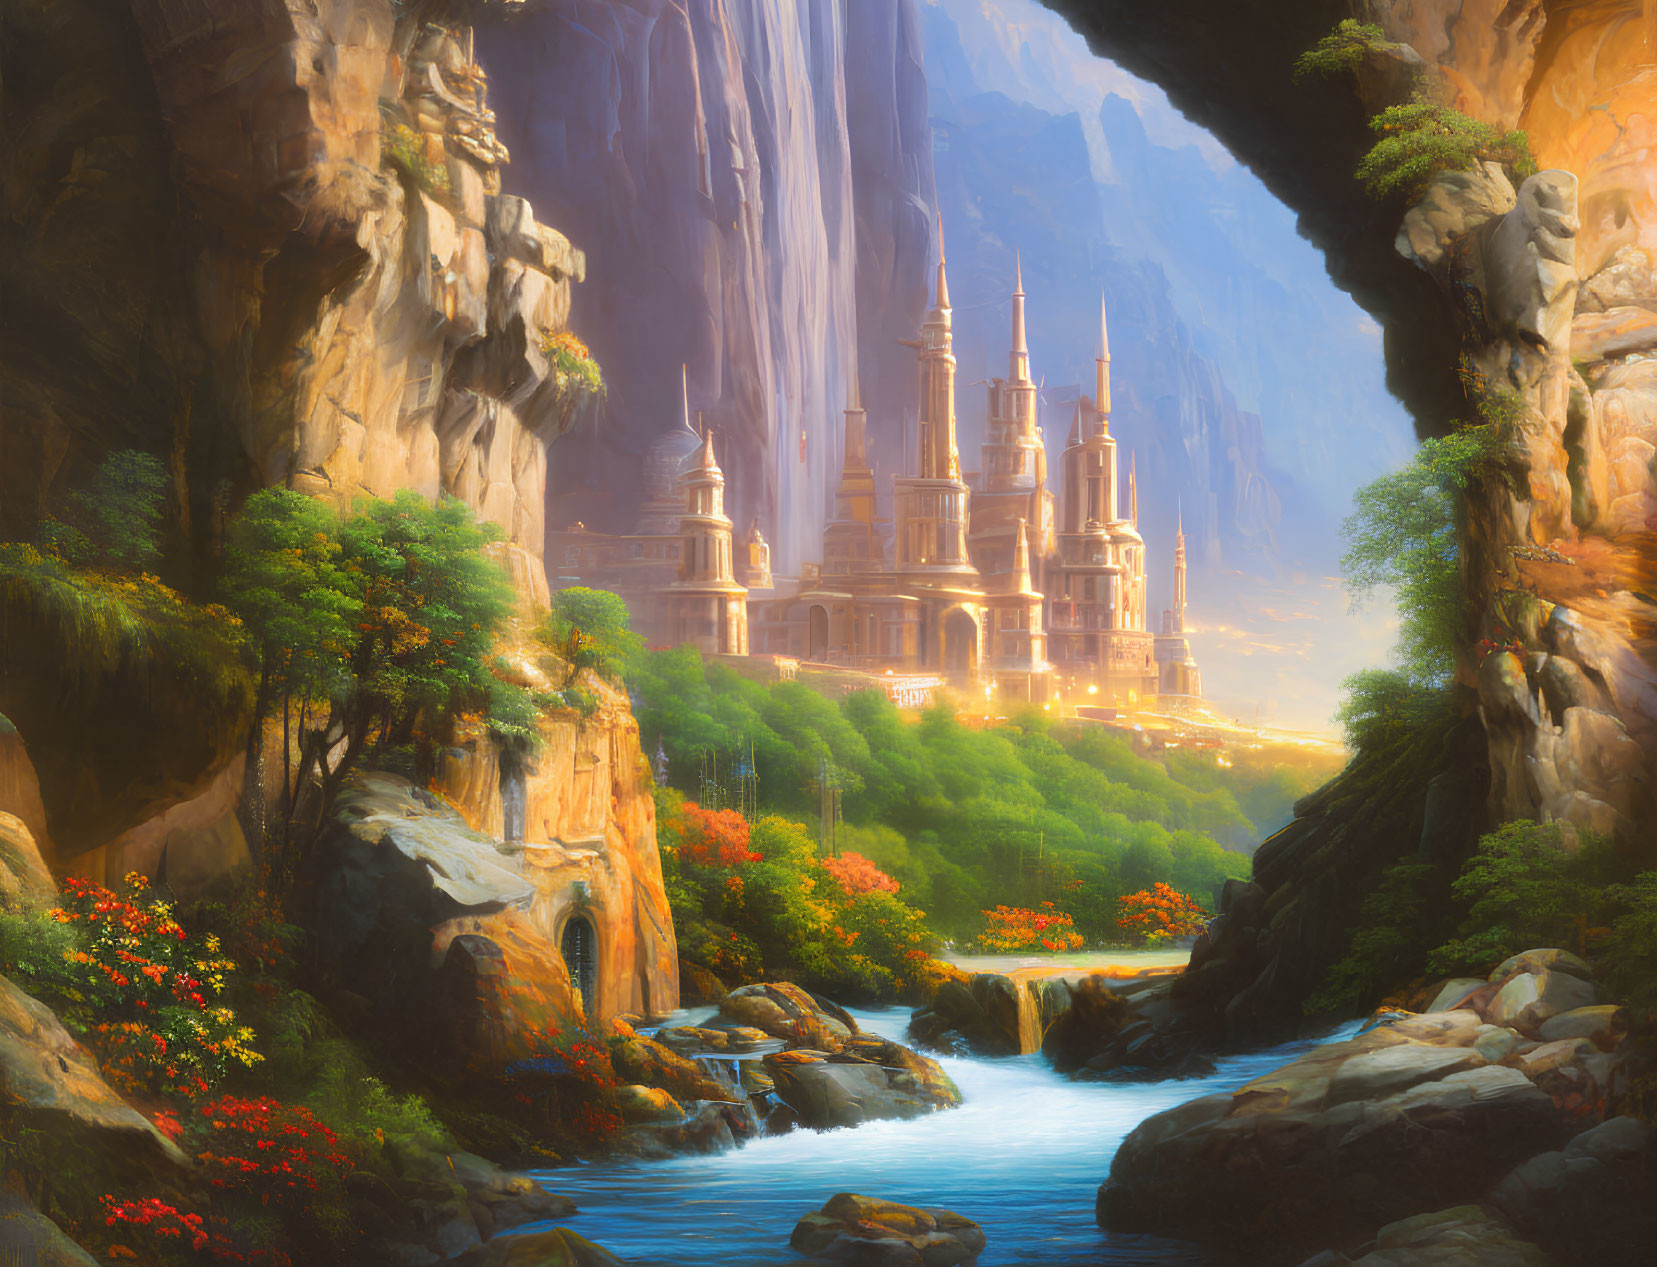 Fantasy landscape with grand castle, cliffs, waterfalls, river, cave entrance, greenery,